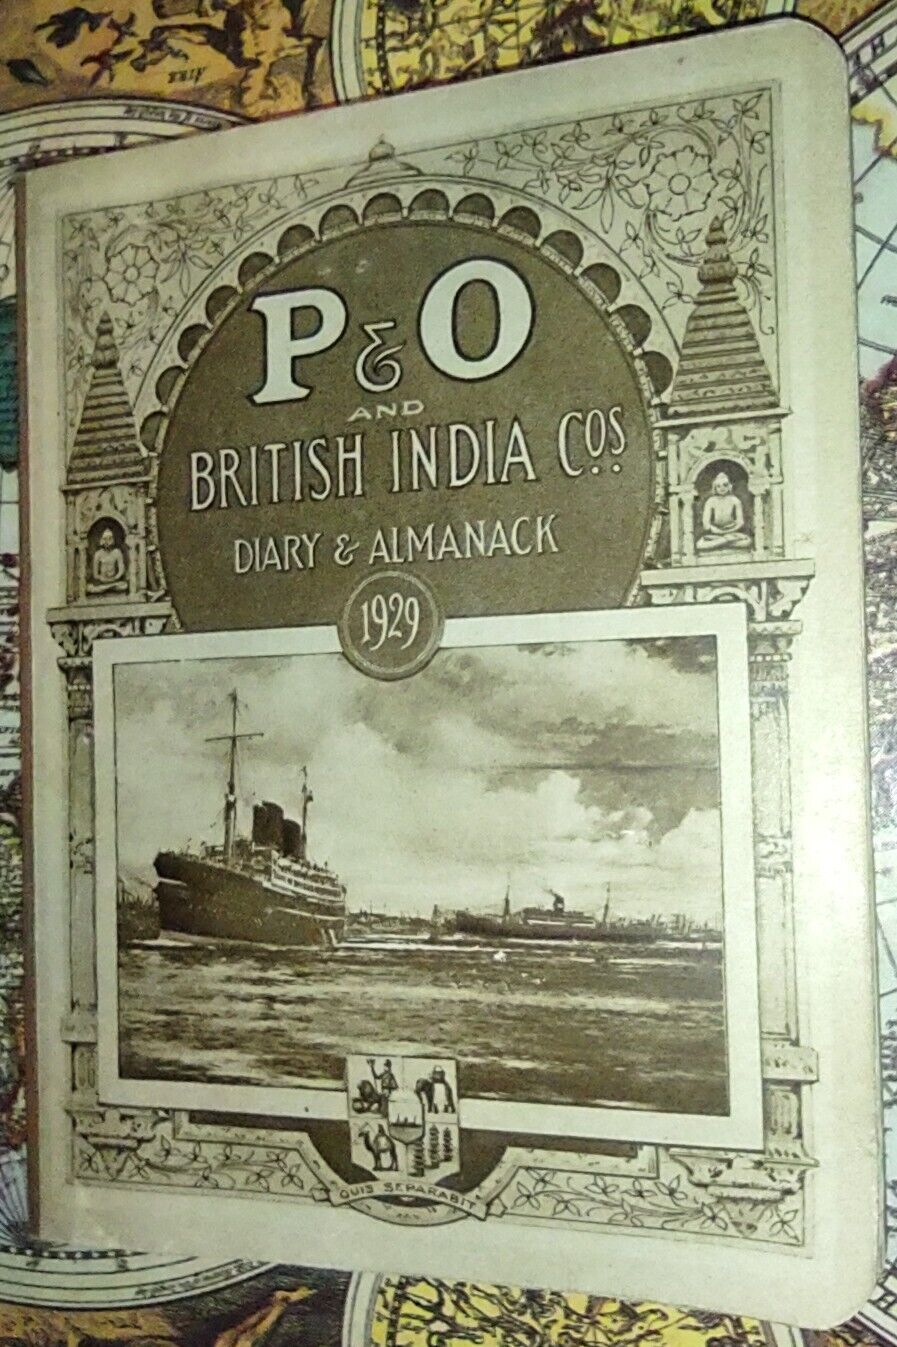 P&O And British India Co's Diary And Almanack 1929. Very FINE CONDIT OCEAN LINER